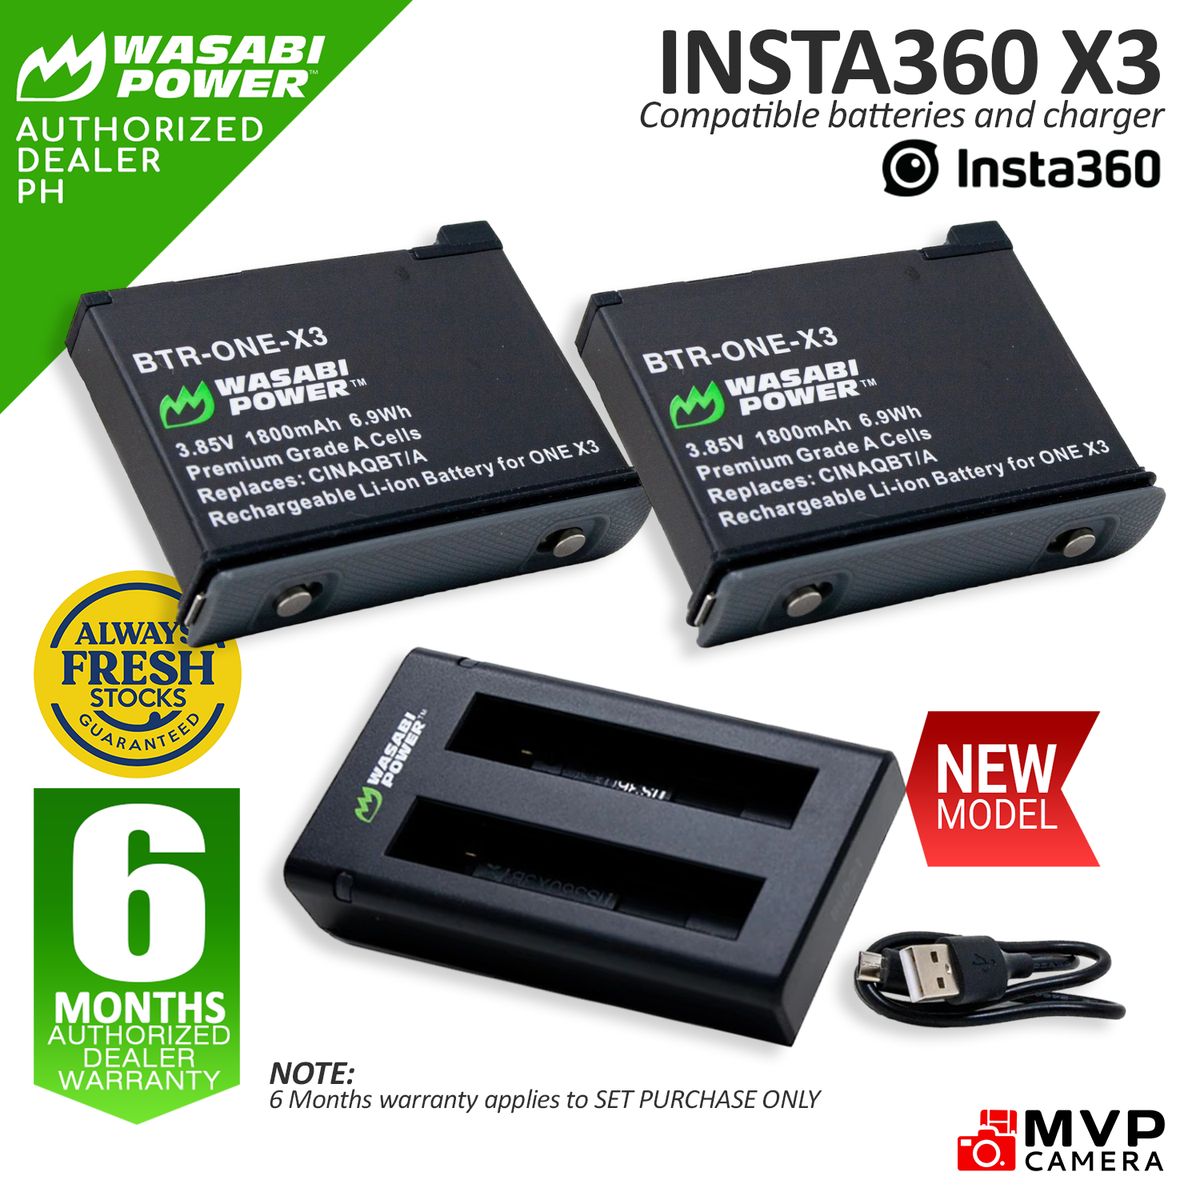 AUTHORIZED PH] WASABI POWER INSTA360 X3 Battery and Charger CINAQBT/A NOT  WATERPROOF MVP CAMERA